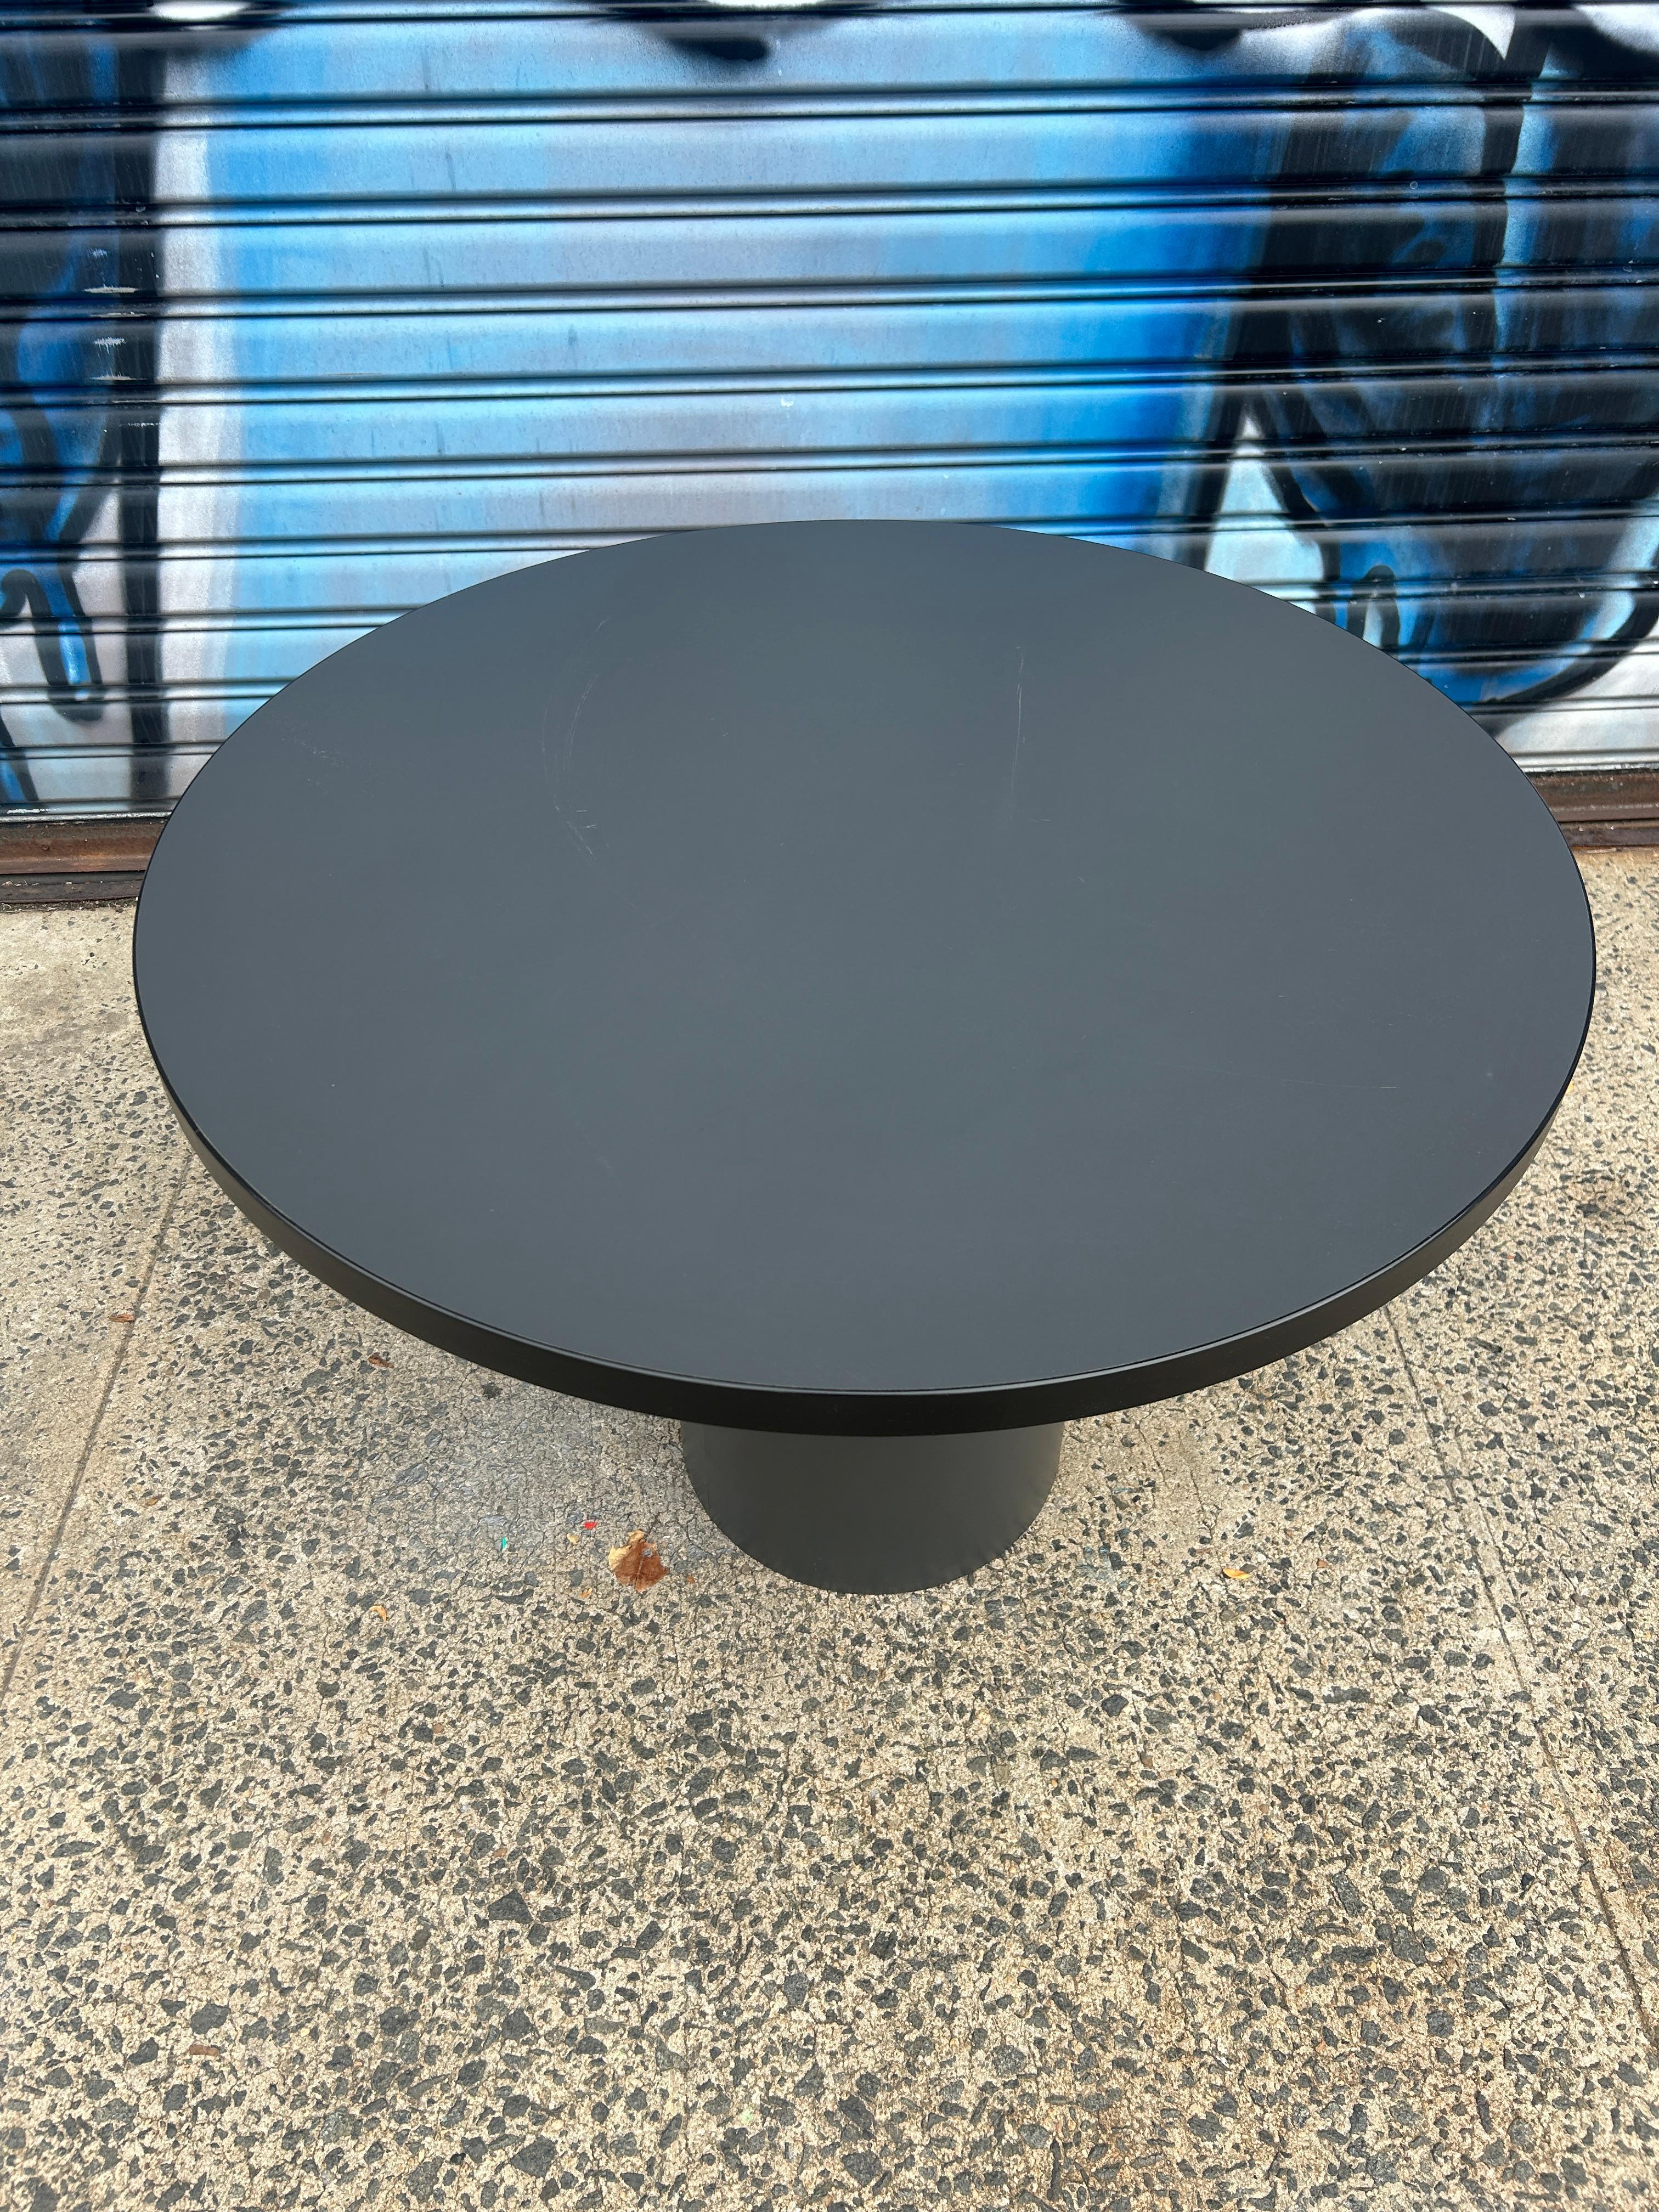 Simple Post Modern Dark Gray Laminate round dining table. Gray Laminate with Black trim. No Chips very clean. Round top and round base. Made circa 1980s Located in Brooklyn NYC.

Measures 42